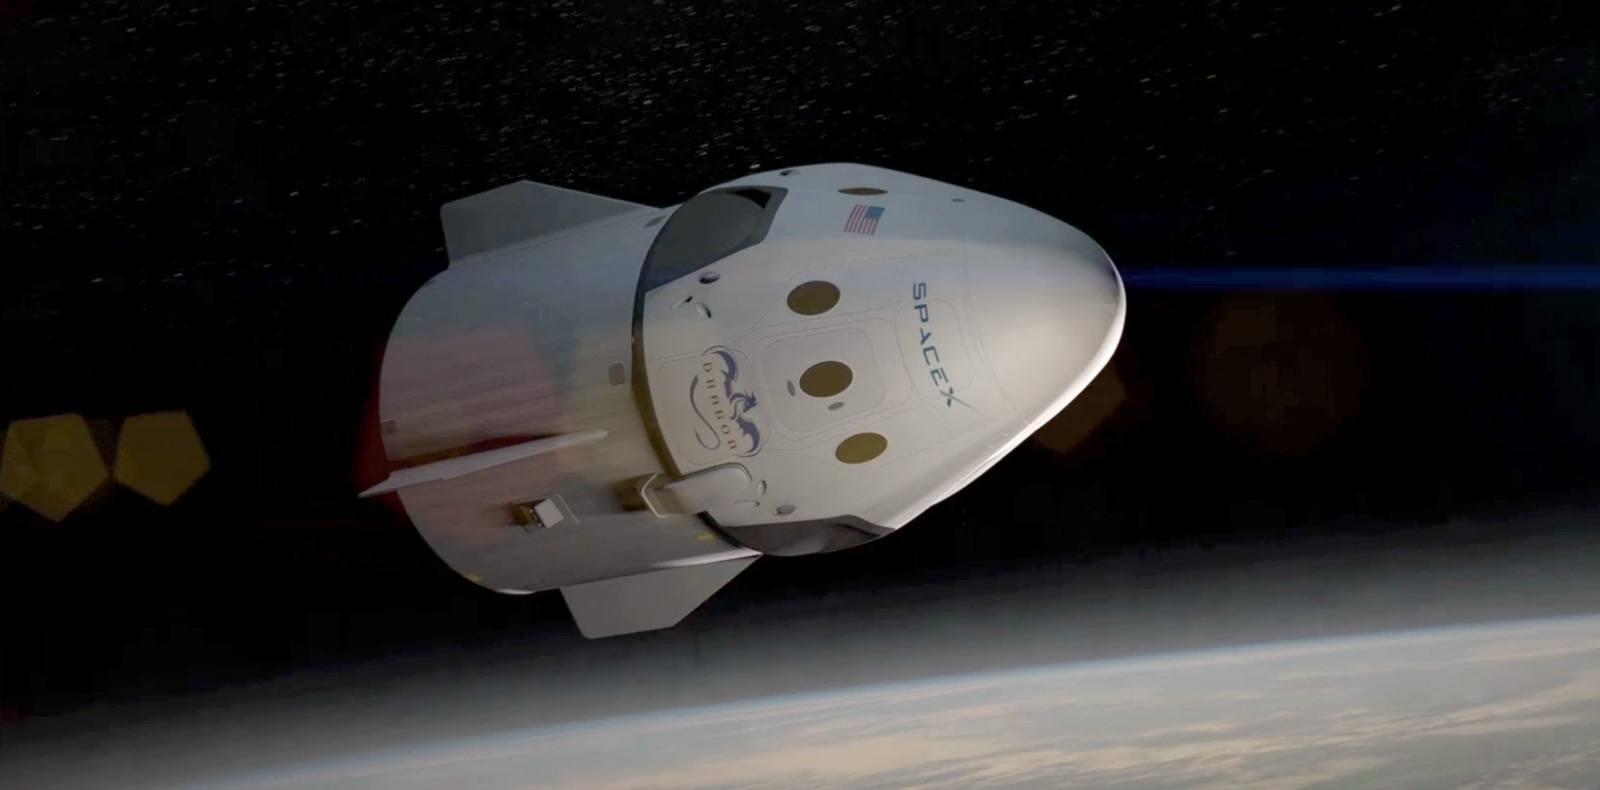 SpaceX' private spaceflight to the moon is postponed until 2019